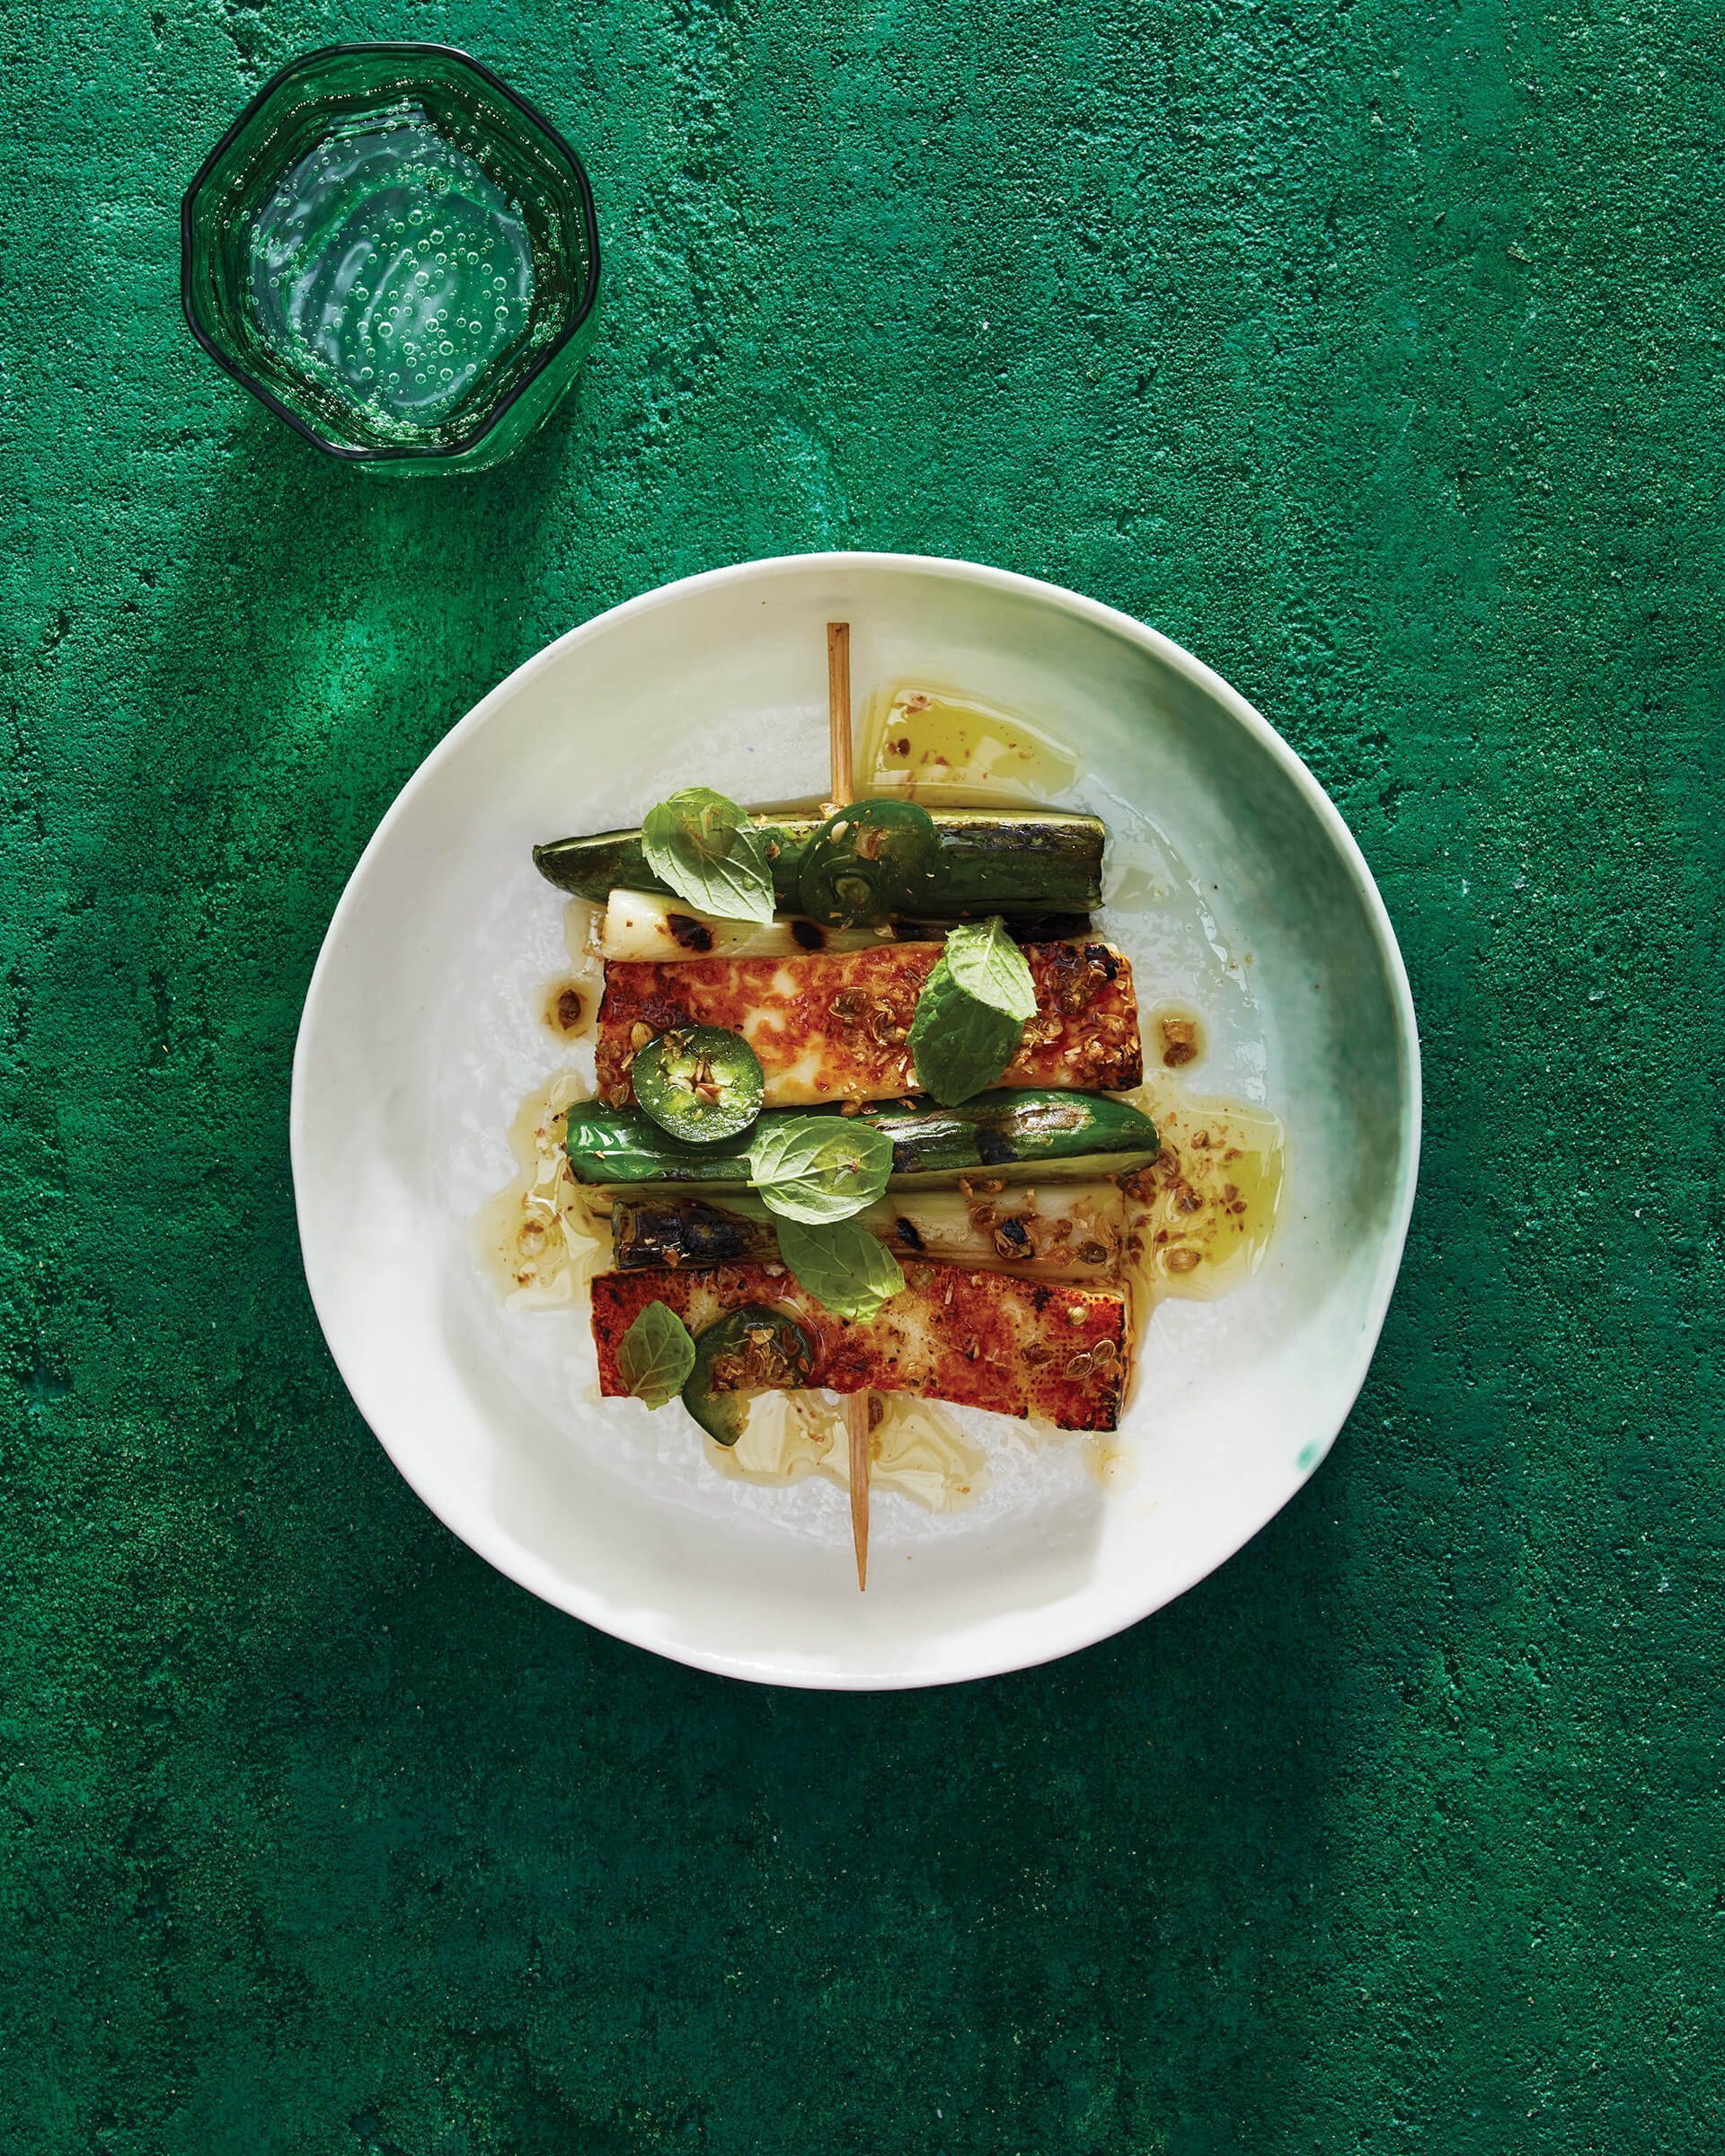 Skewered cucumbers and halloumi cheese on a white dish against a bright green table.